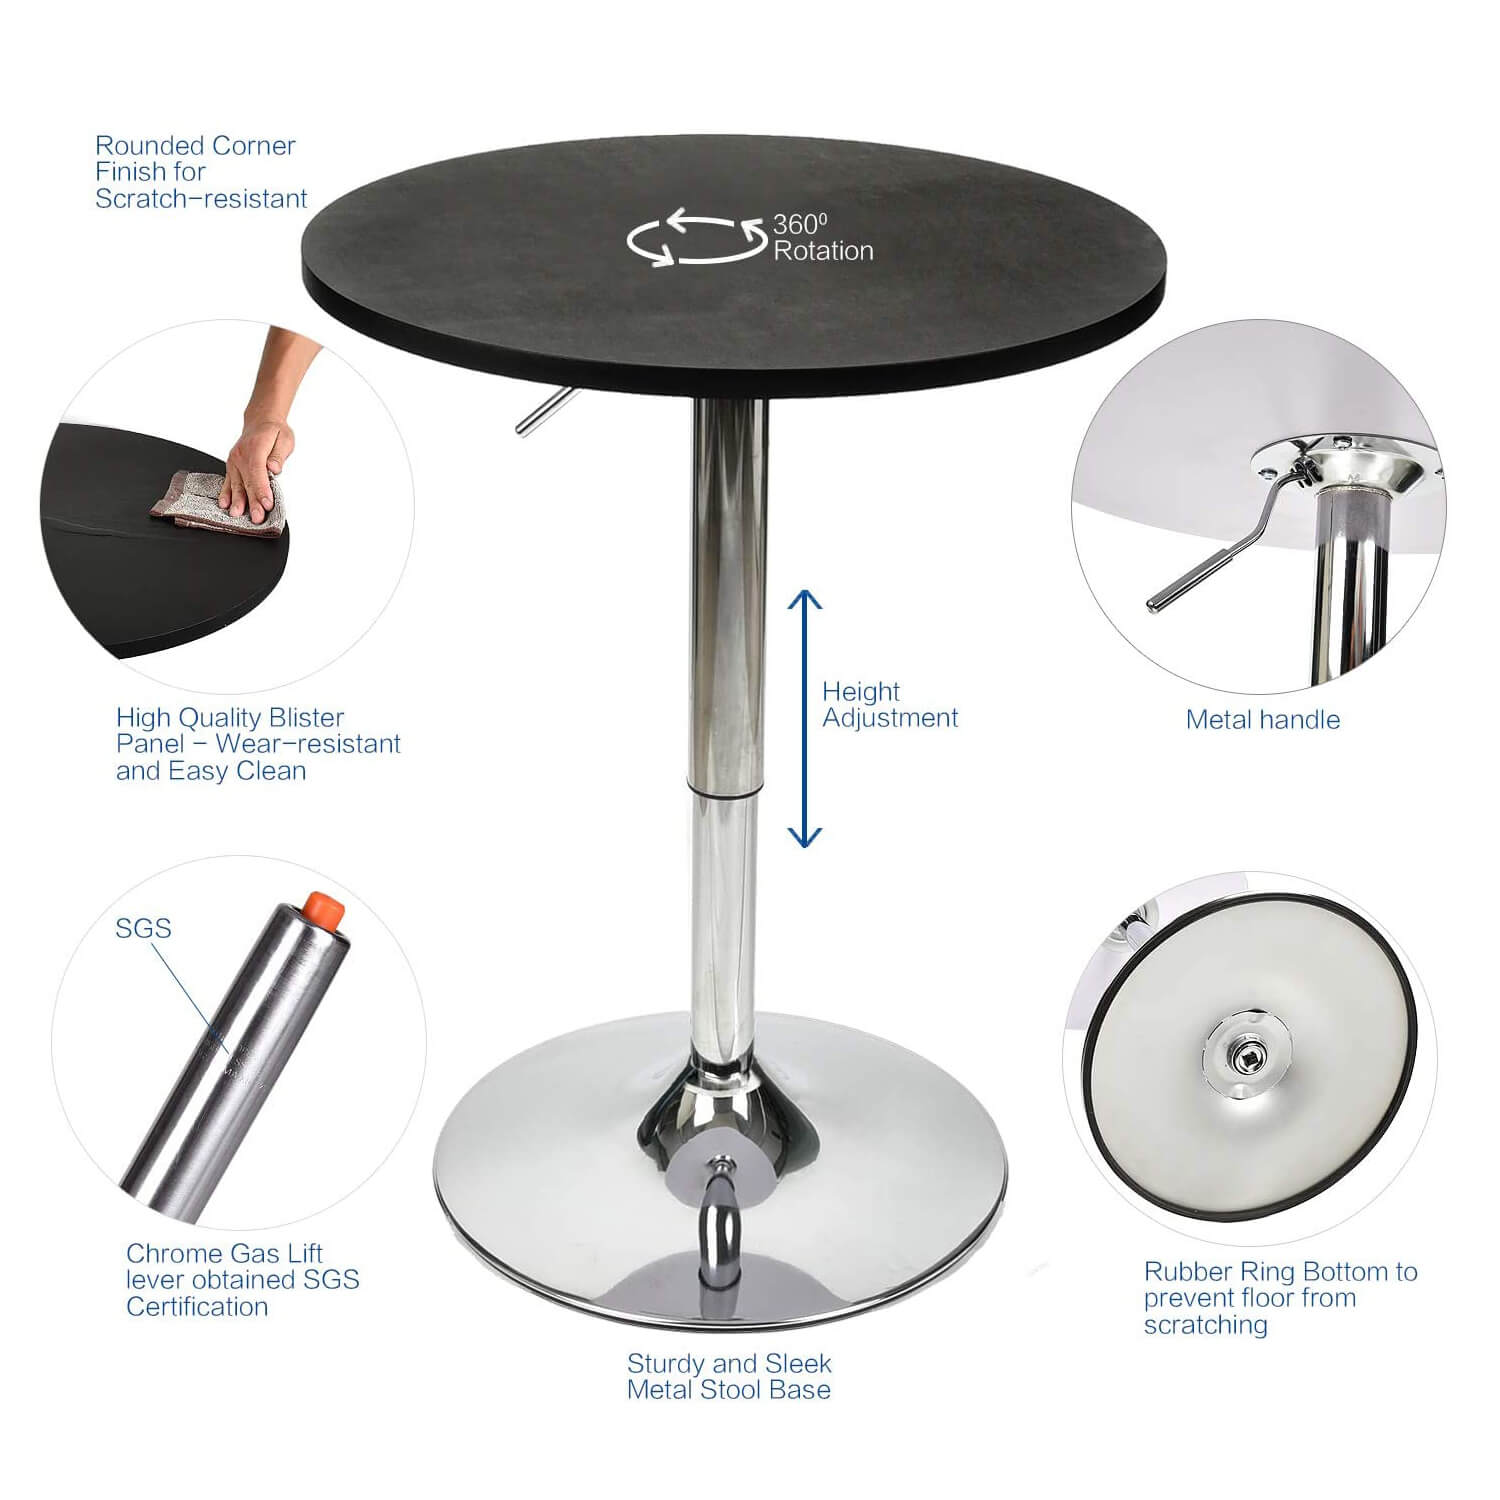 Elecwish black bar table has four features